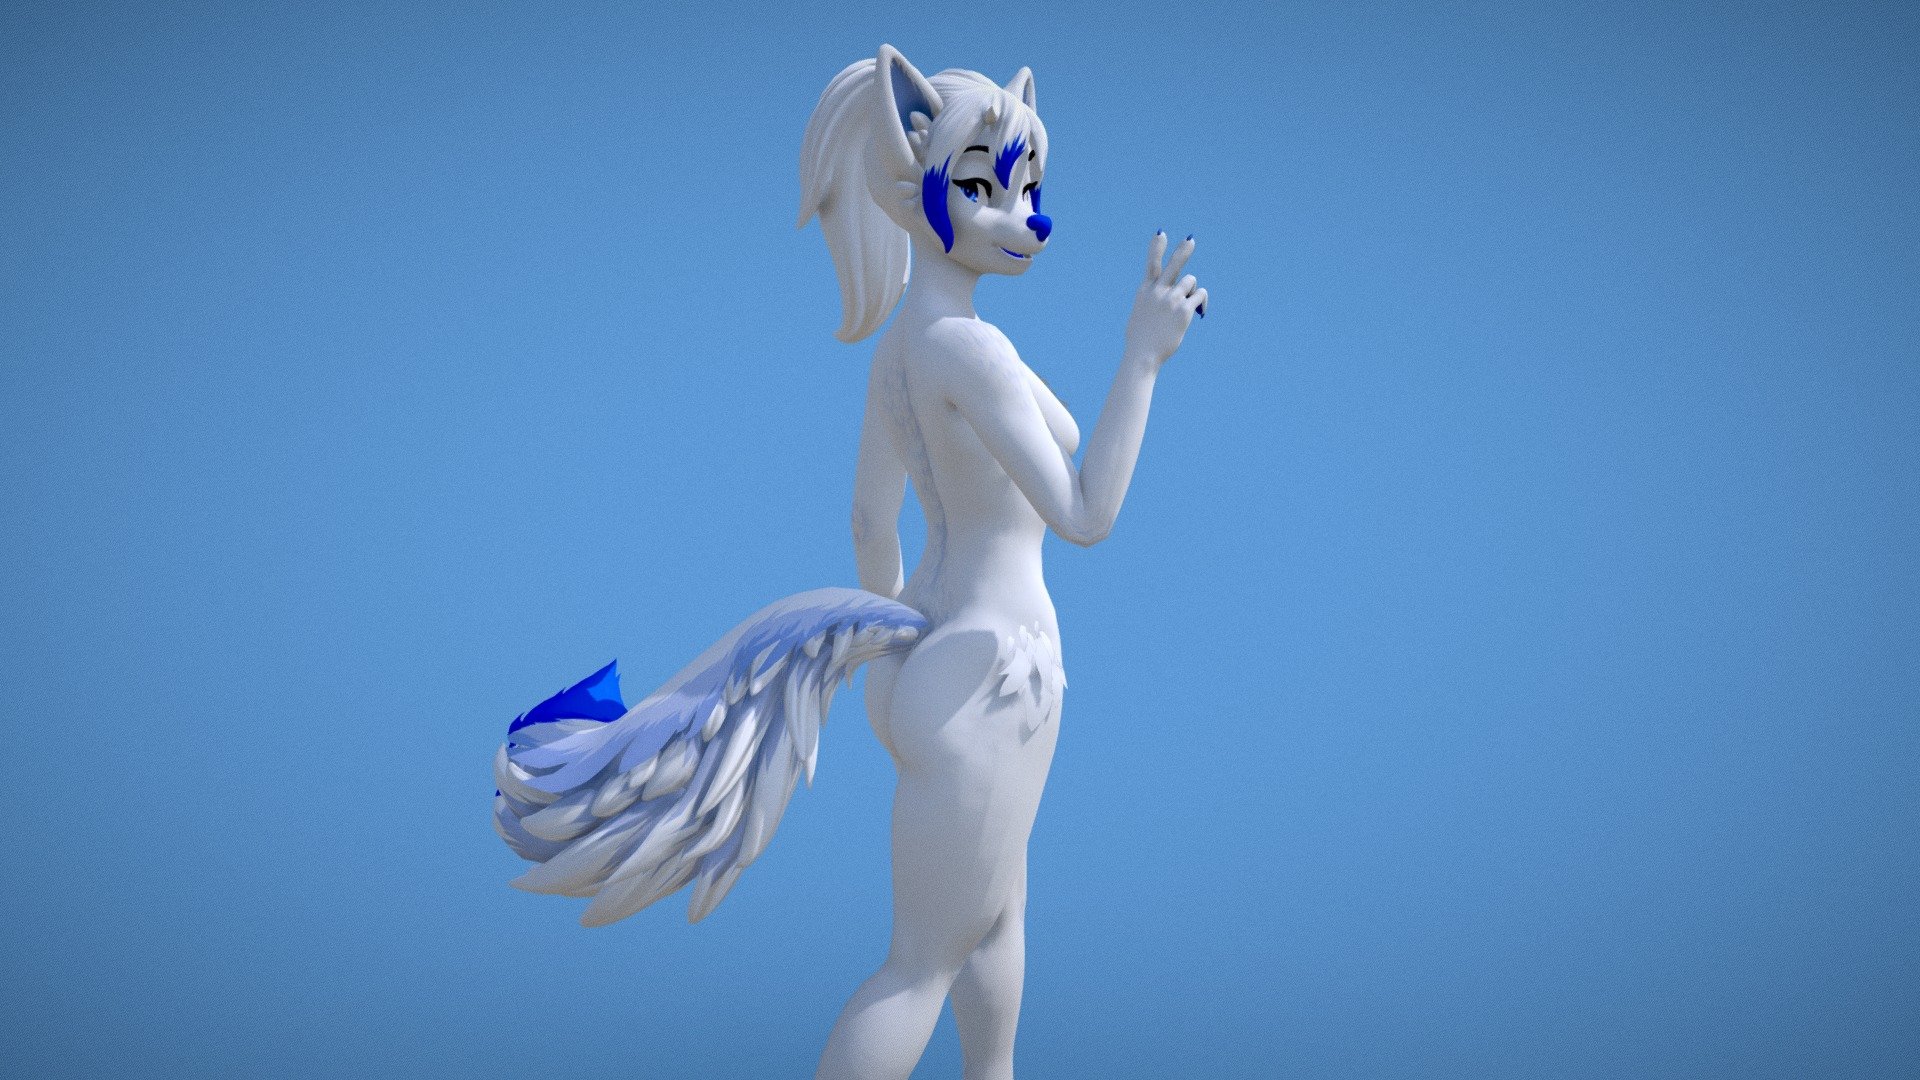 VRChat commission for twitter.com/Puppy_Fur! 
Had a lot of fun making this one :)

Commission info: furaffinity.net/commissions/juliawinterpaw/ - Amber - 3D model by JuliaWinterpaw 3d model